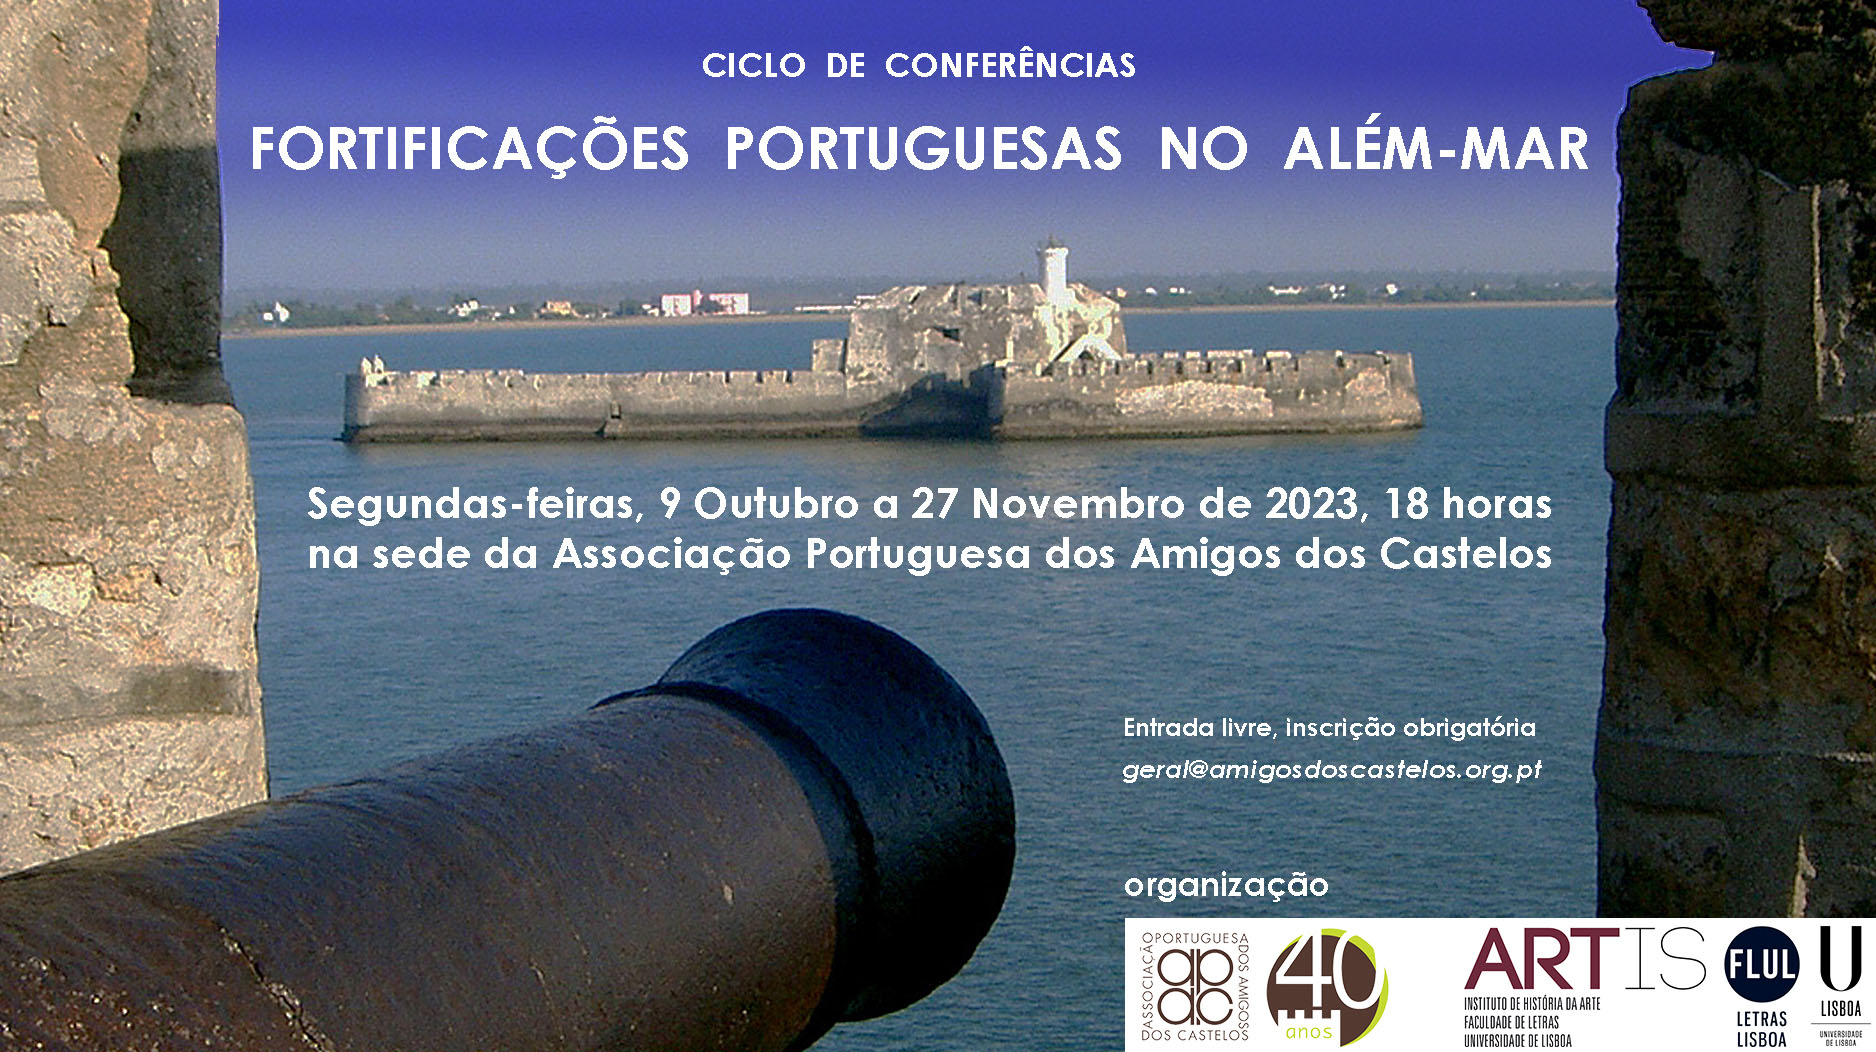 CONFERENCE SERIES "PORTUGUESE FORTRESSES OVERSEAS"